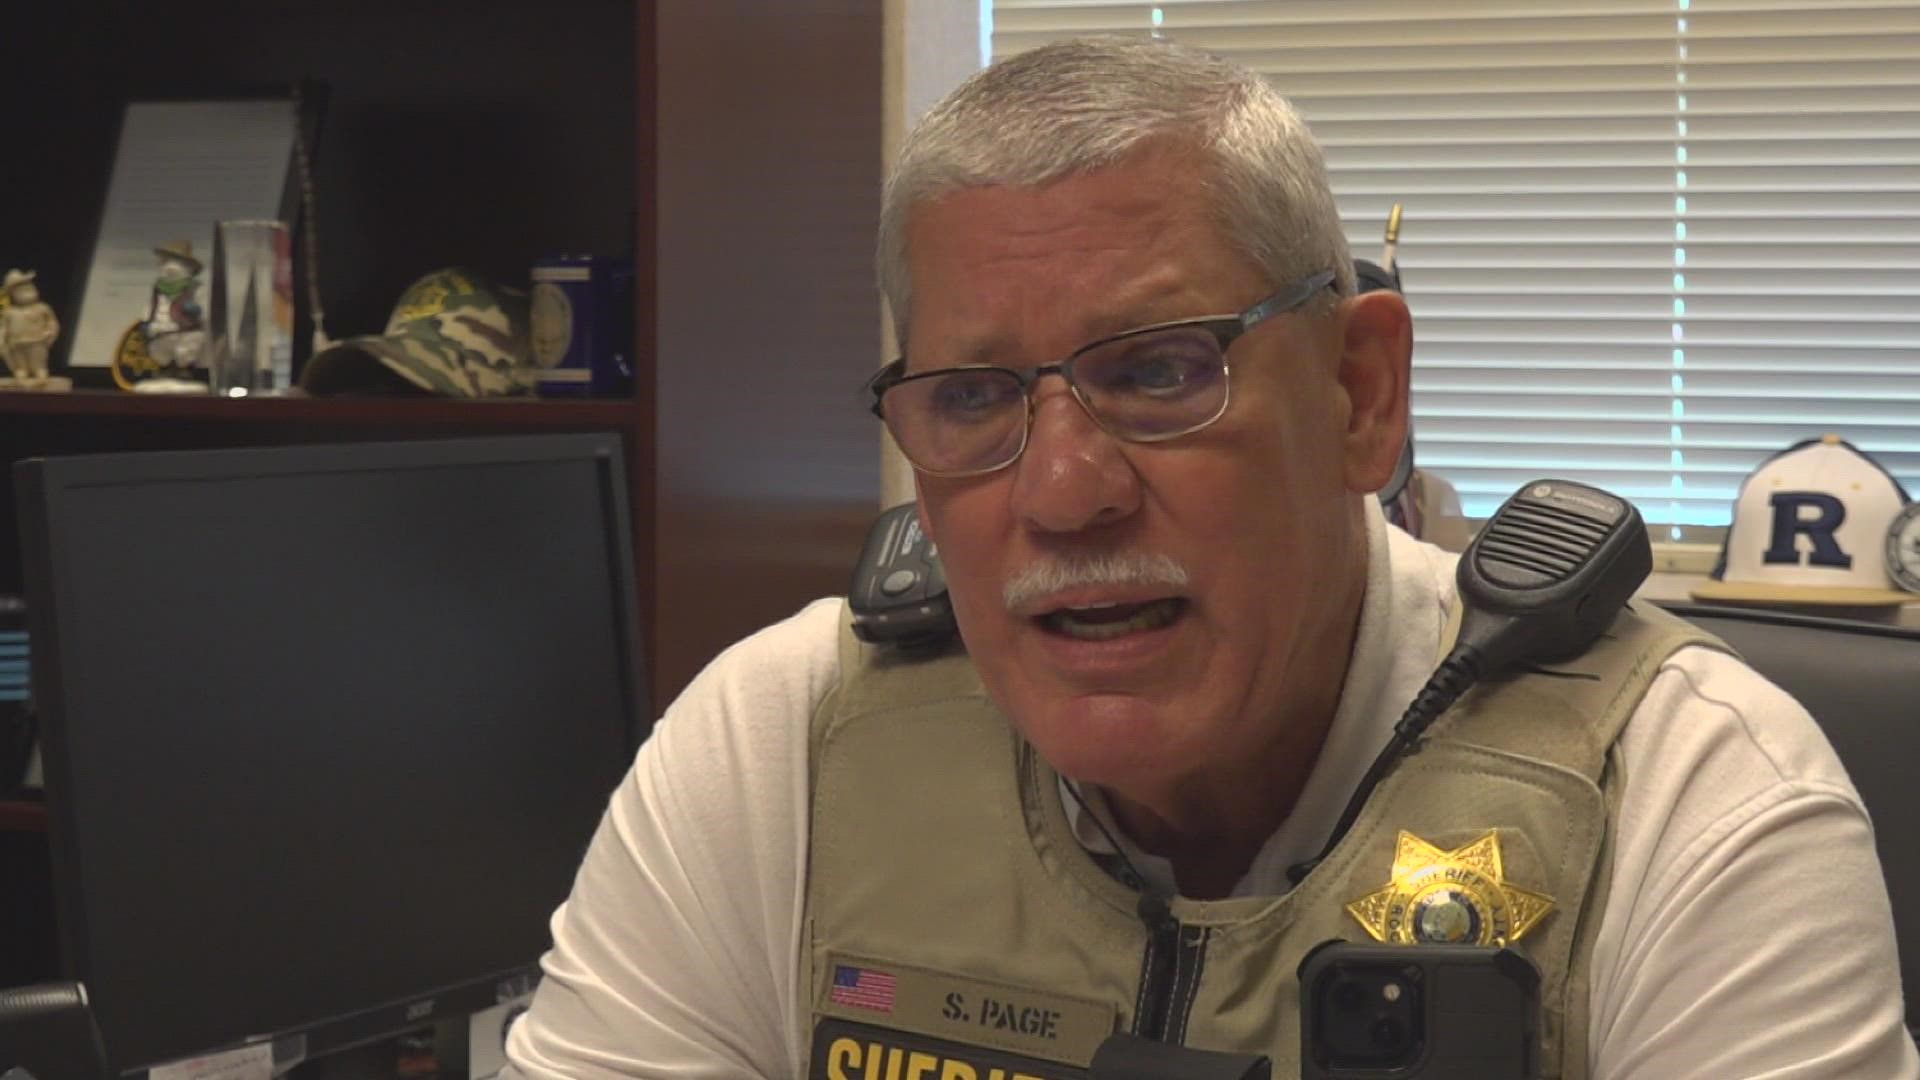 Sheriff Sam Page and a Guilford County deputy said danger is possible every day on the job.